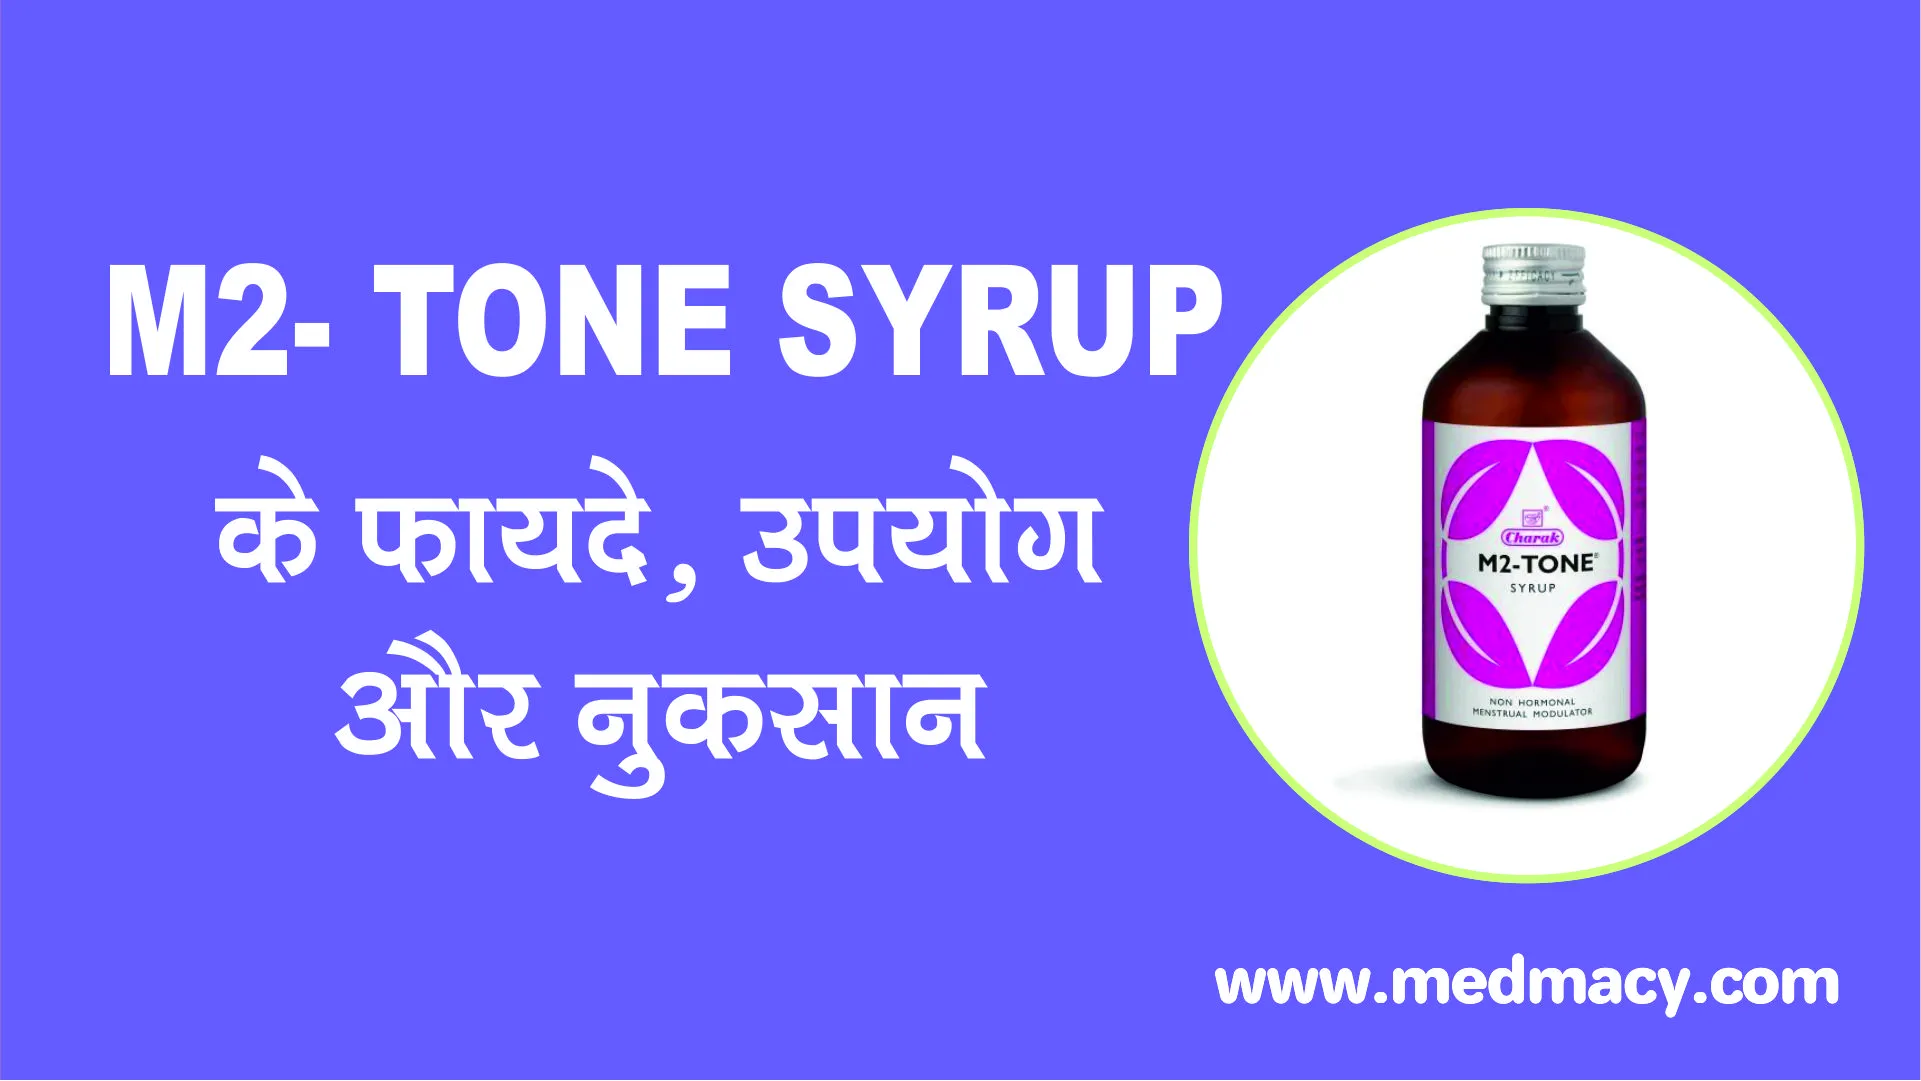 m2 tone syrup uses in hindi